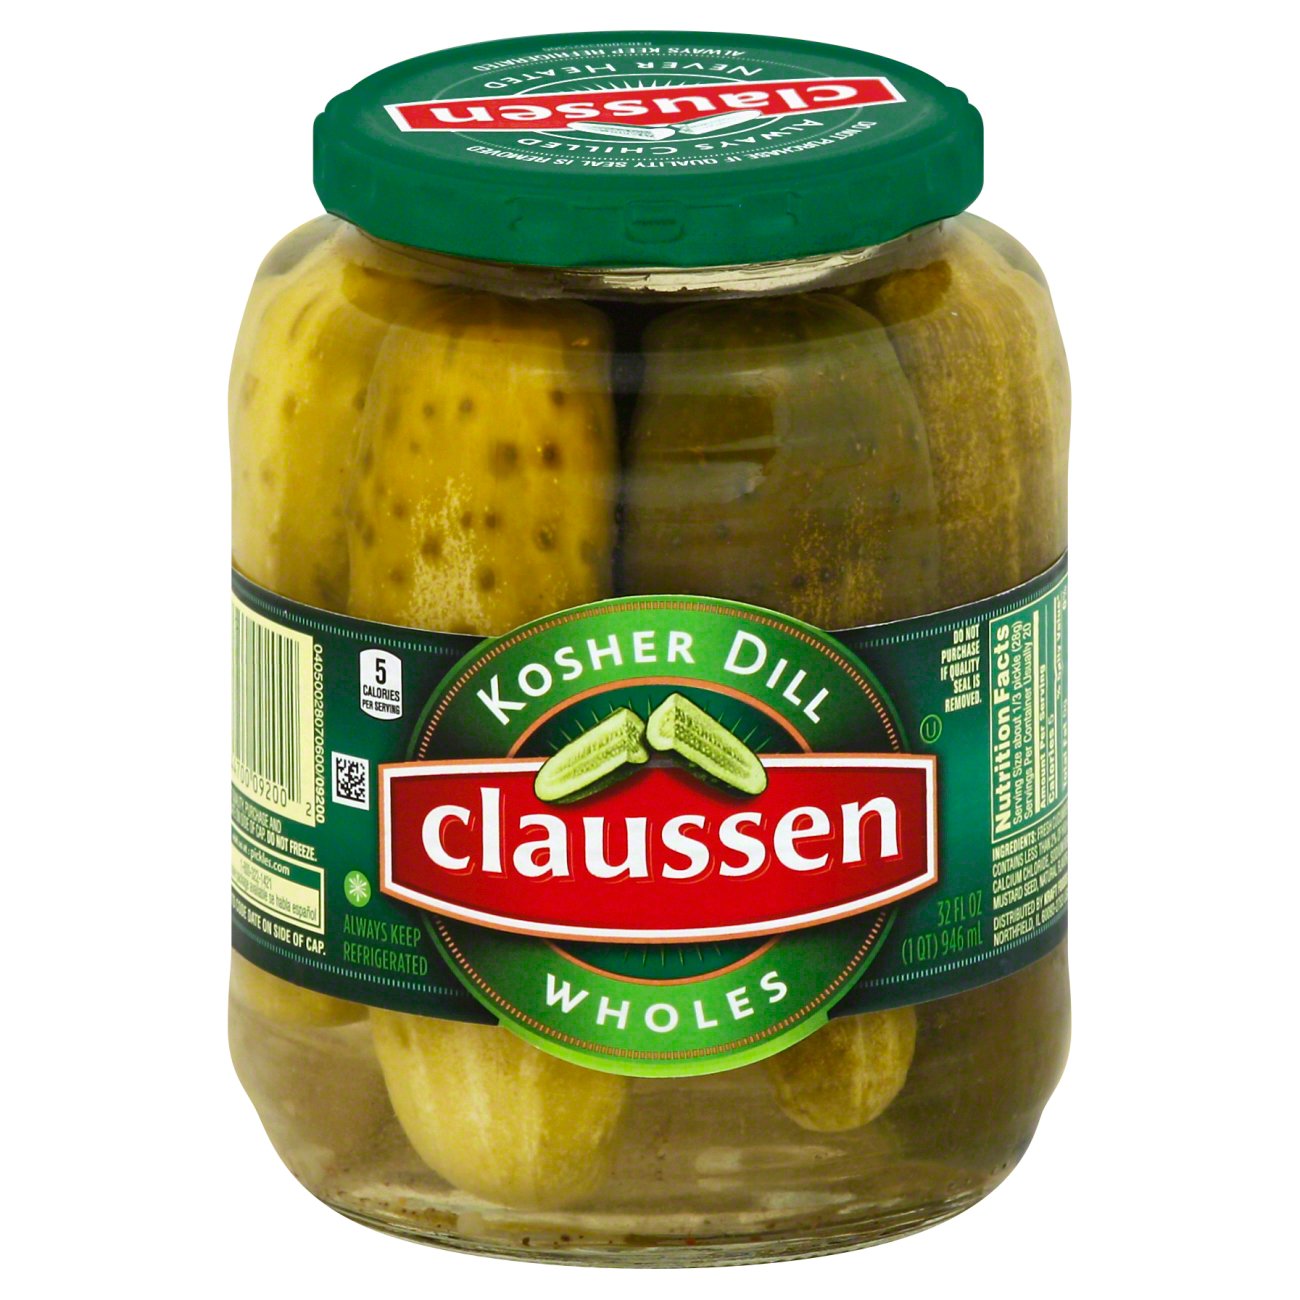 Claussen Whole Kosher Dill Pickles Shop Vegetables At H E B